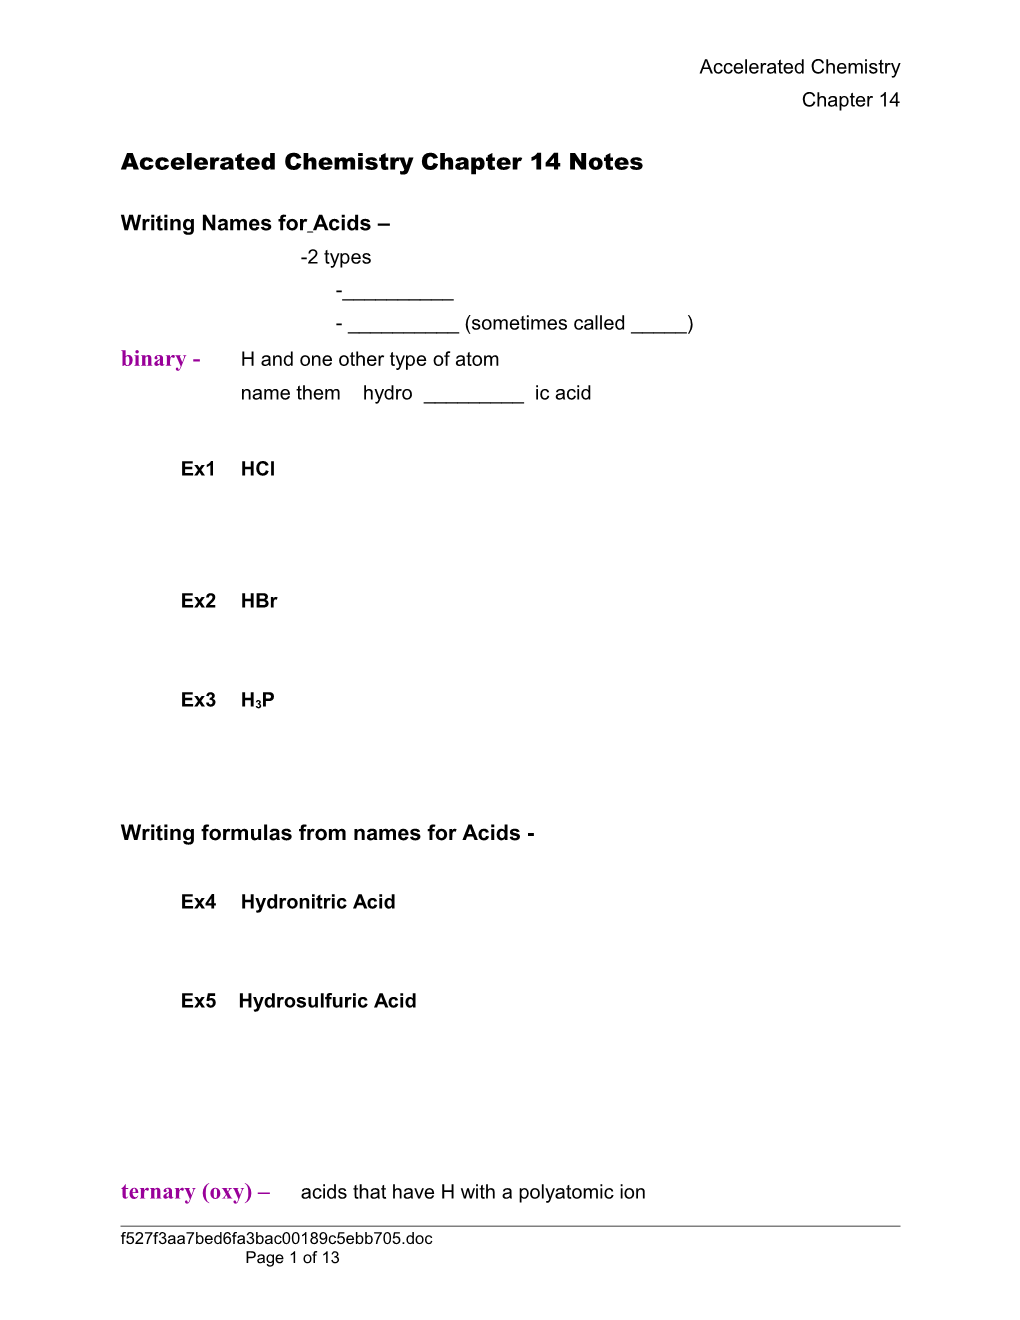 Accelerated Chemistry Chapter 14 Notes